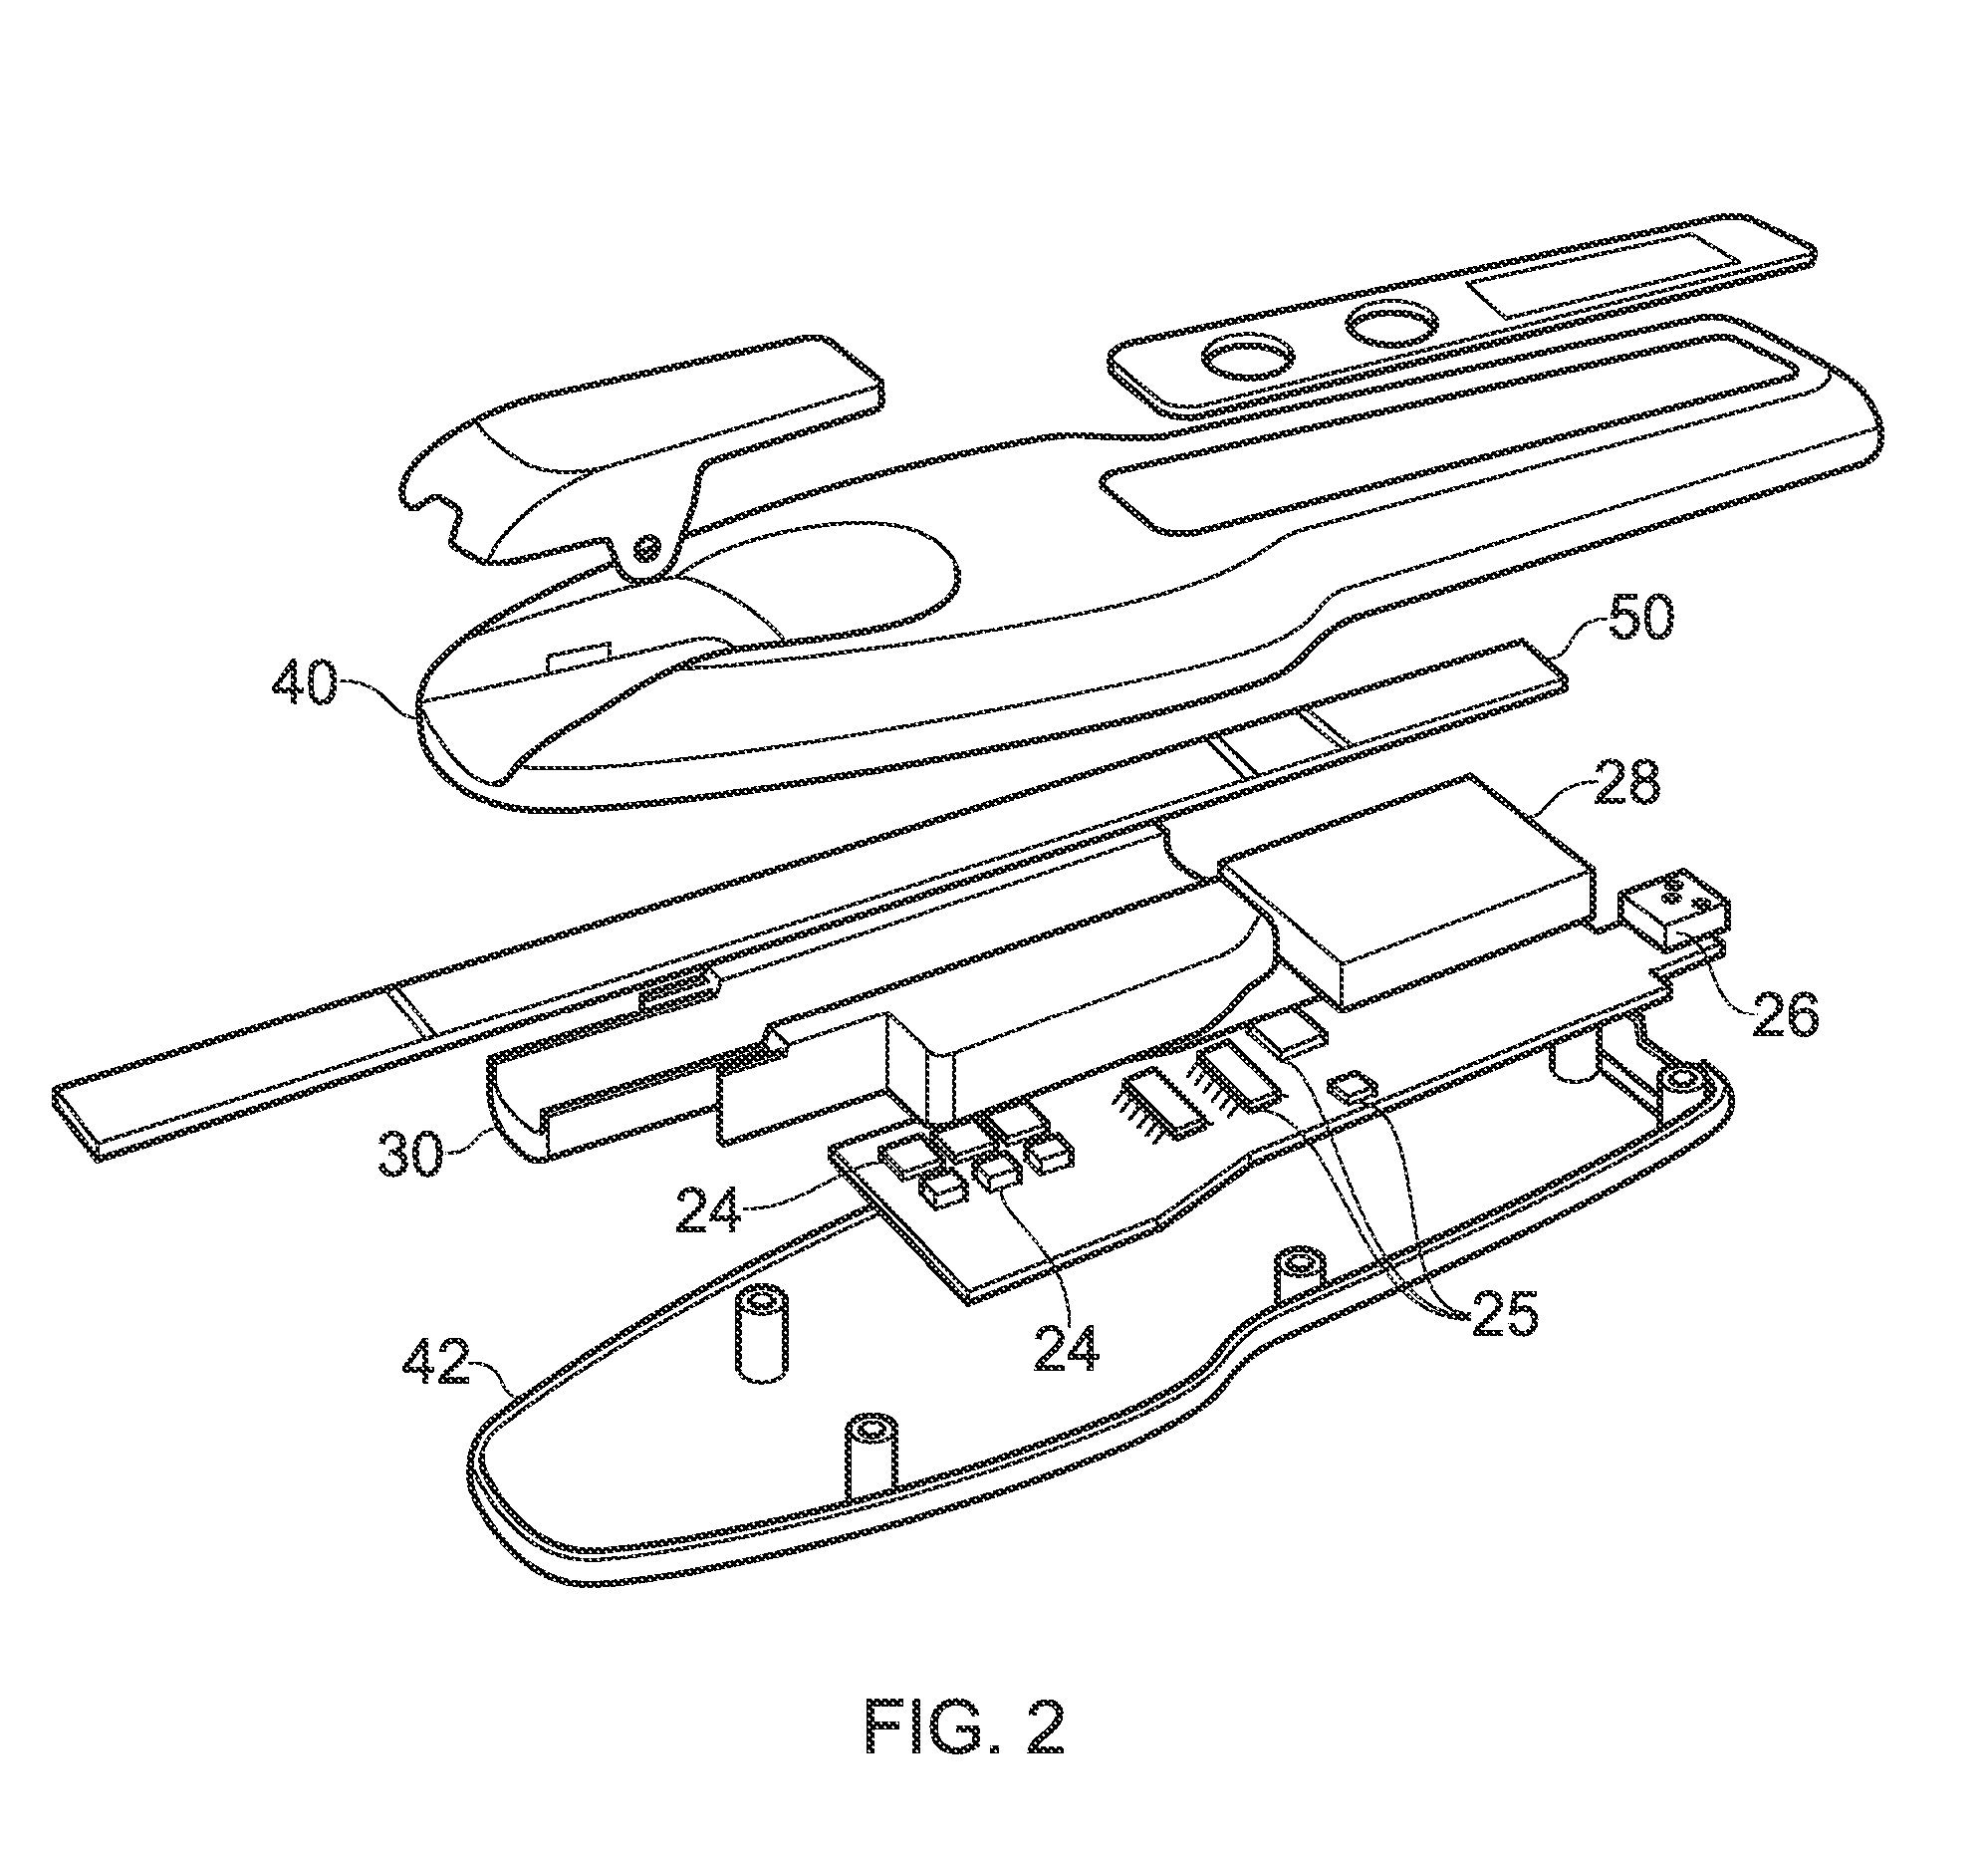 Fertility and pregnancy monitoring device and method